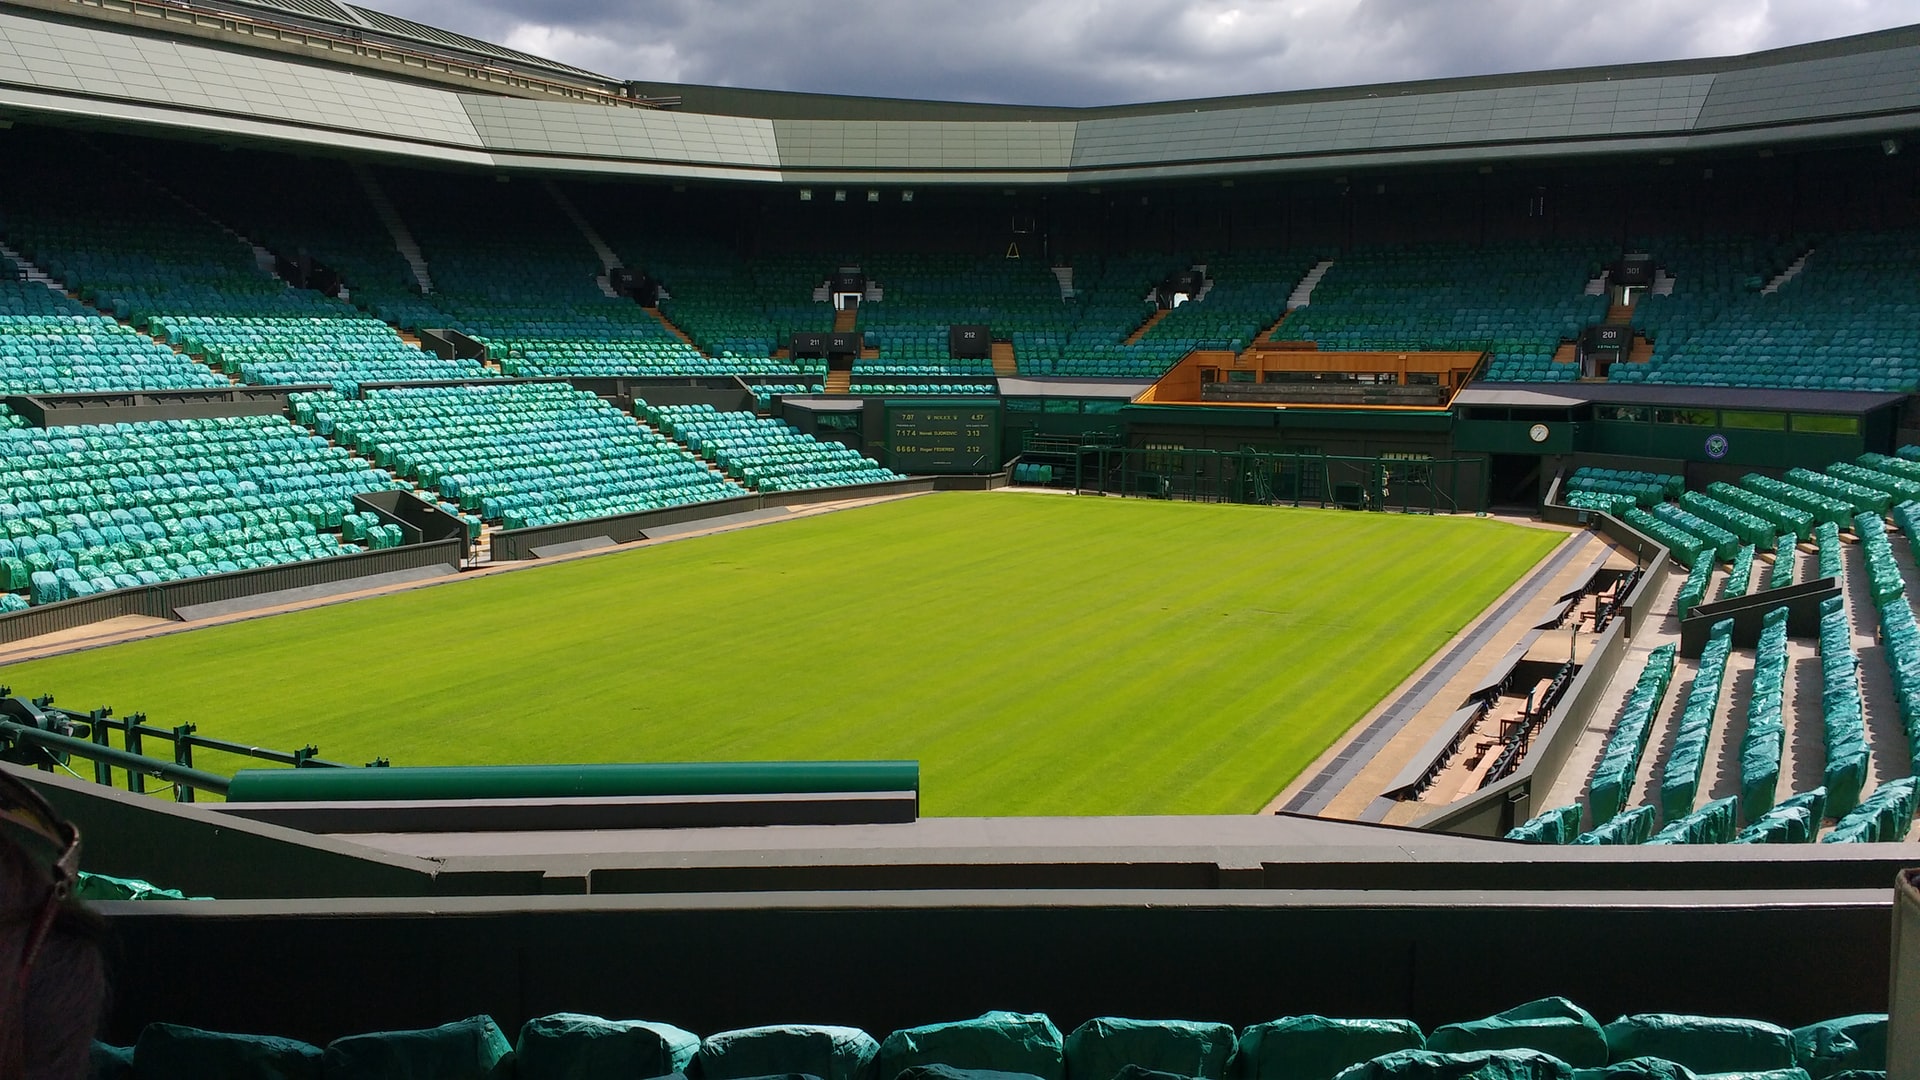 Centre Court at the All England Lawn Tennis and Croquet Club, host of the Wimbledon Championships